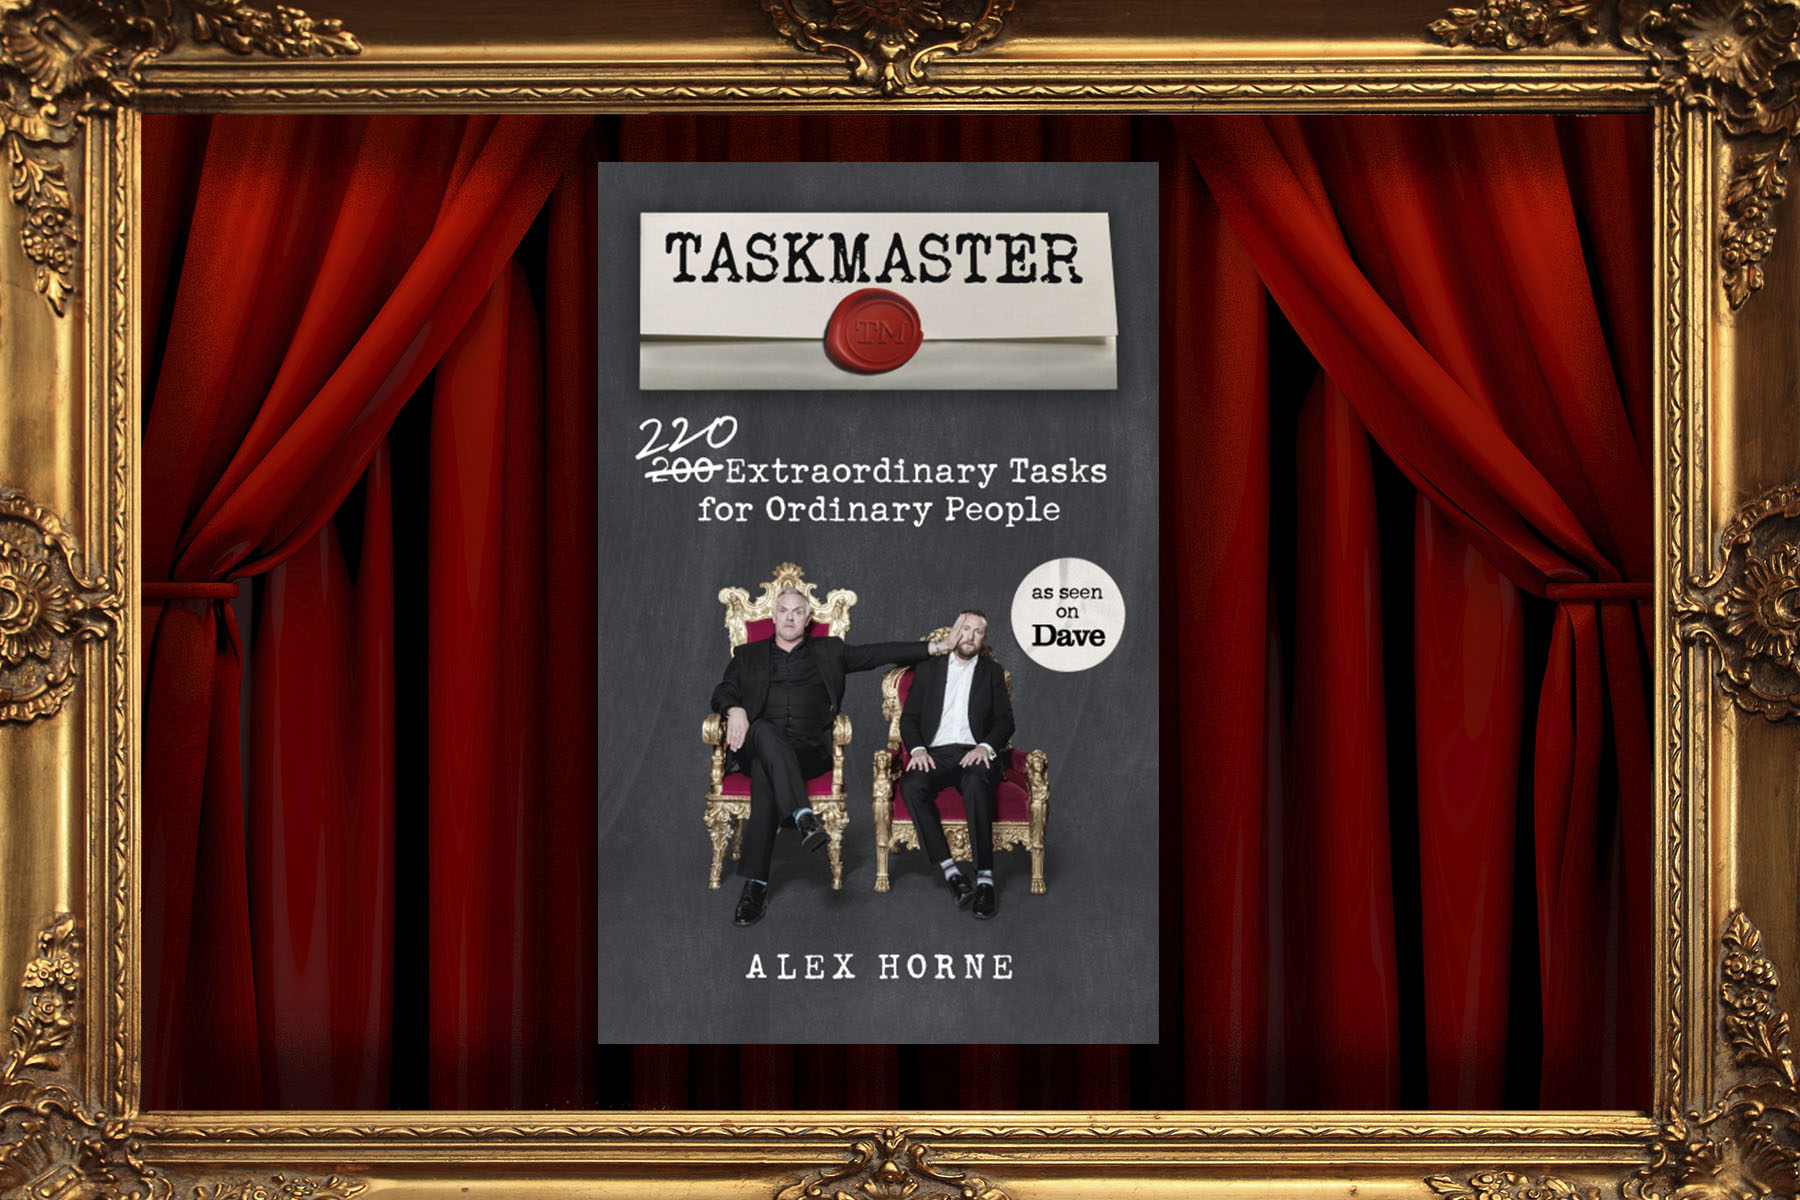 The Taskmaster book, in front of the trademark curtains of the television show.